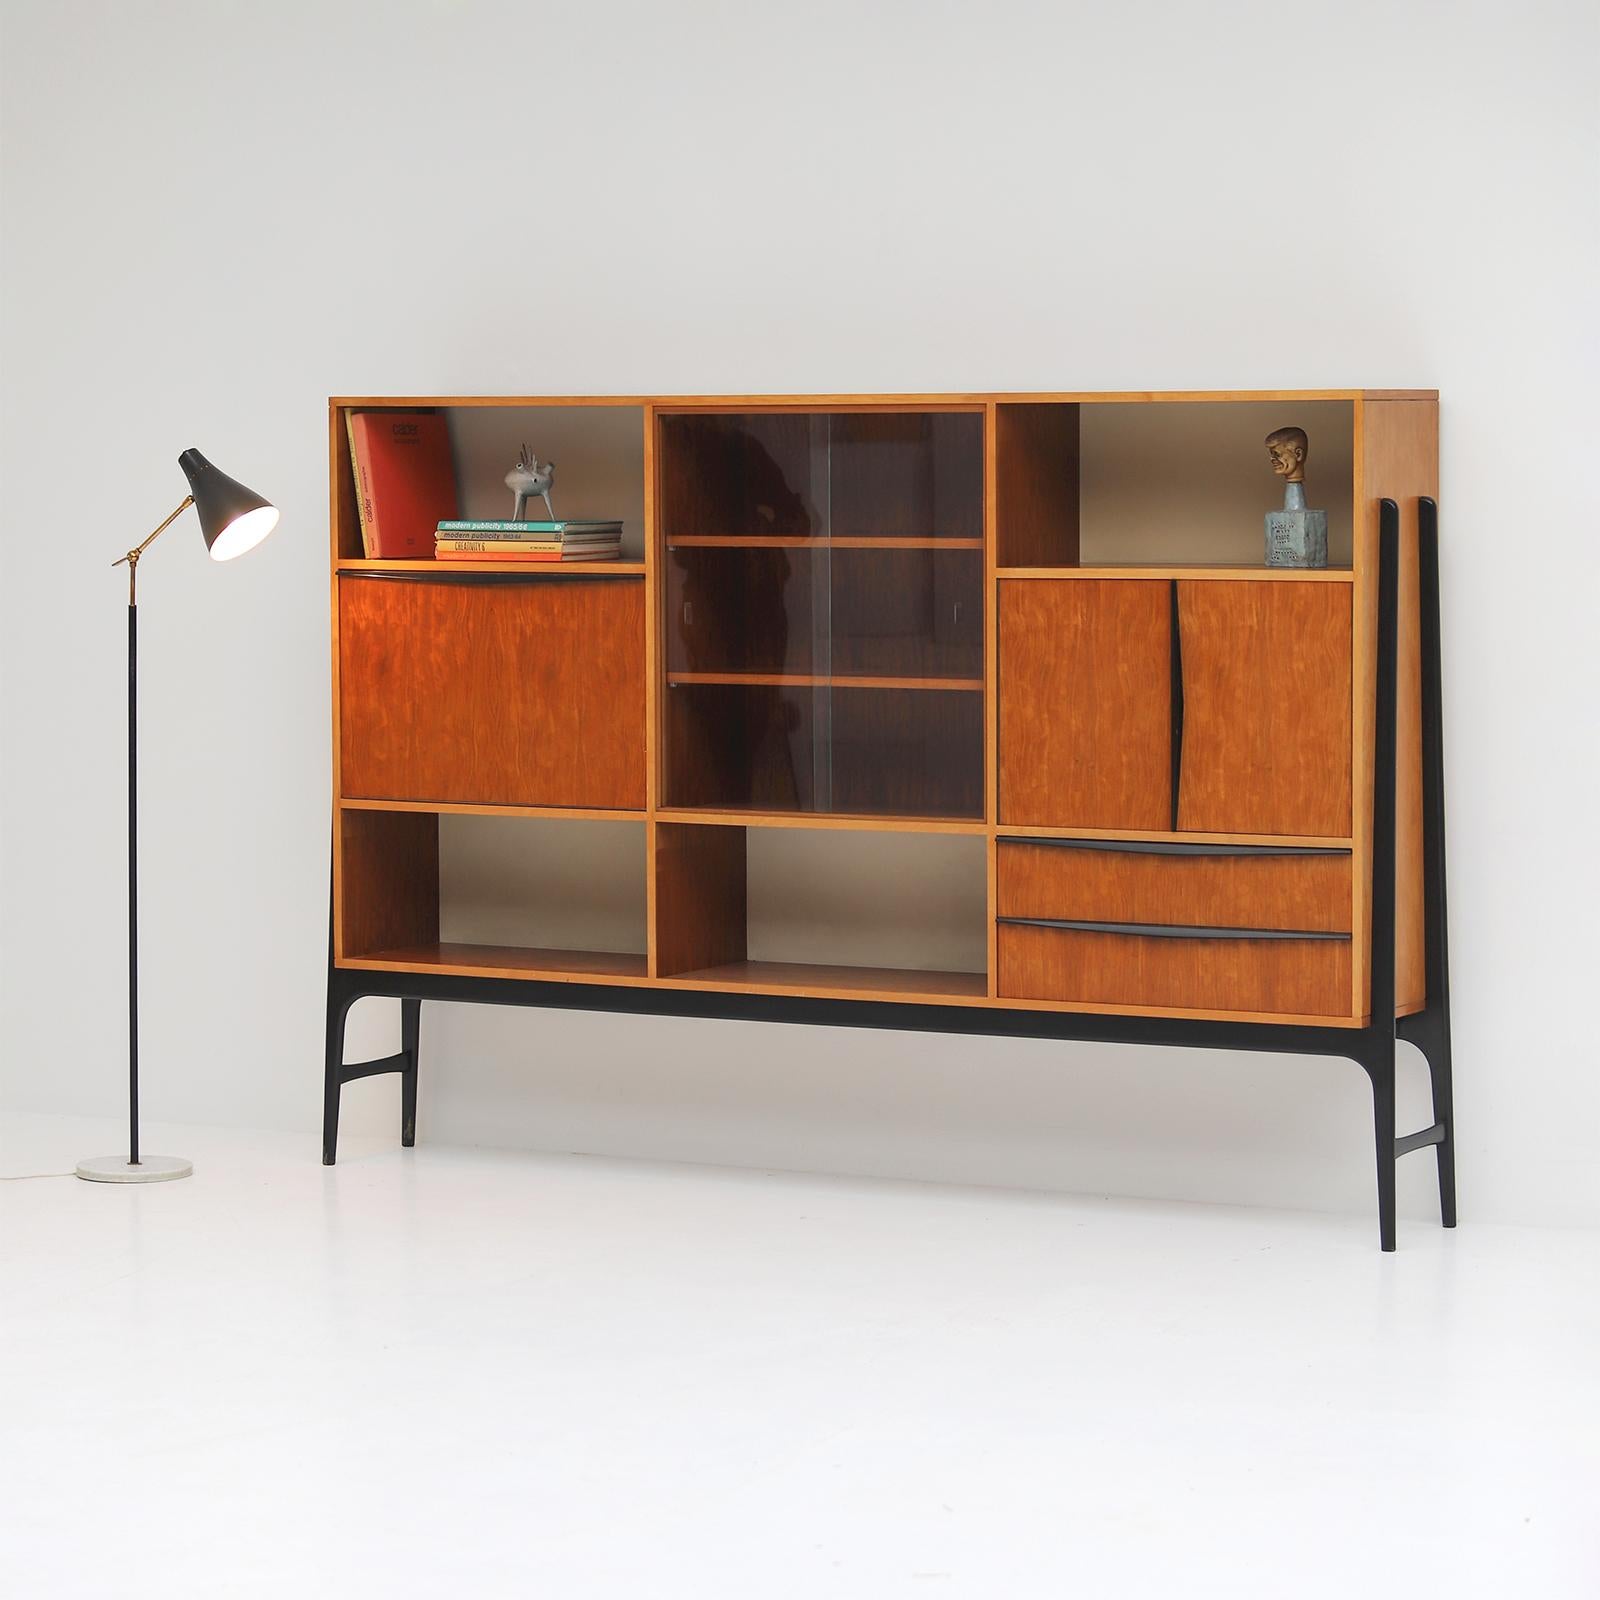 Very rare highboard designed by Alfred Hendrickx for Belform in the 1950s. This unique sideboard is a decorative eye catcher and made from a beautiful patterned wood resting on a black lacquered frame. A folding bar with mirrored glass is hidden